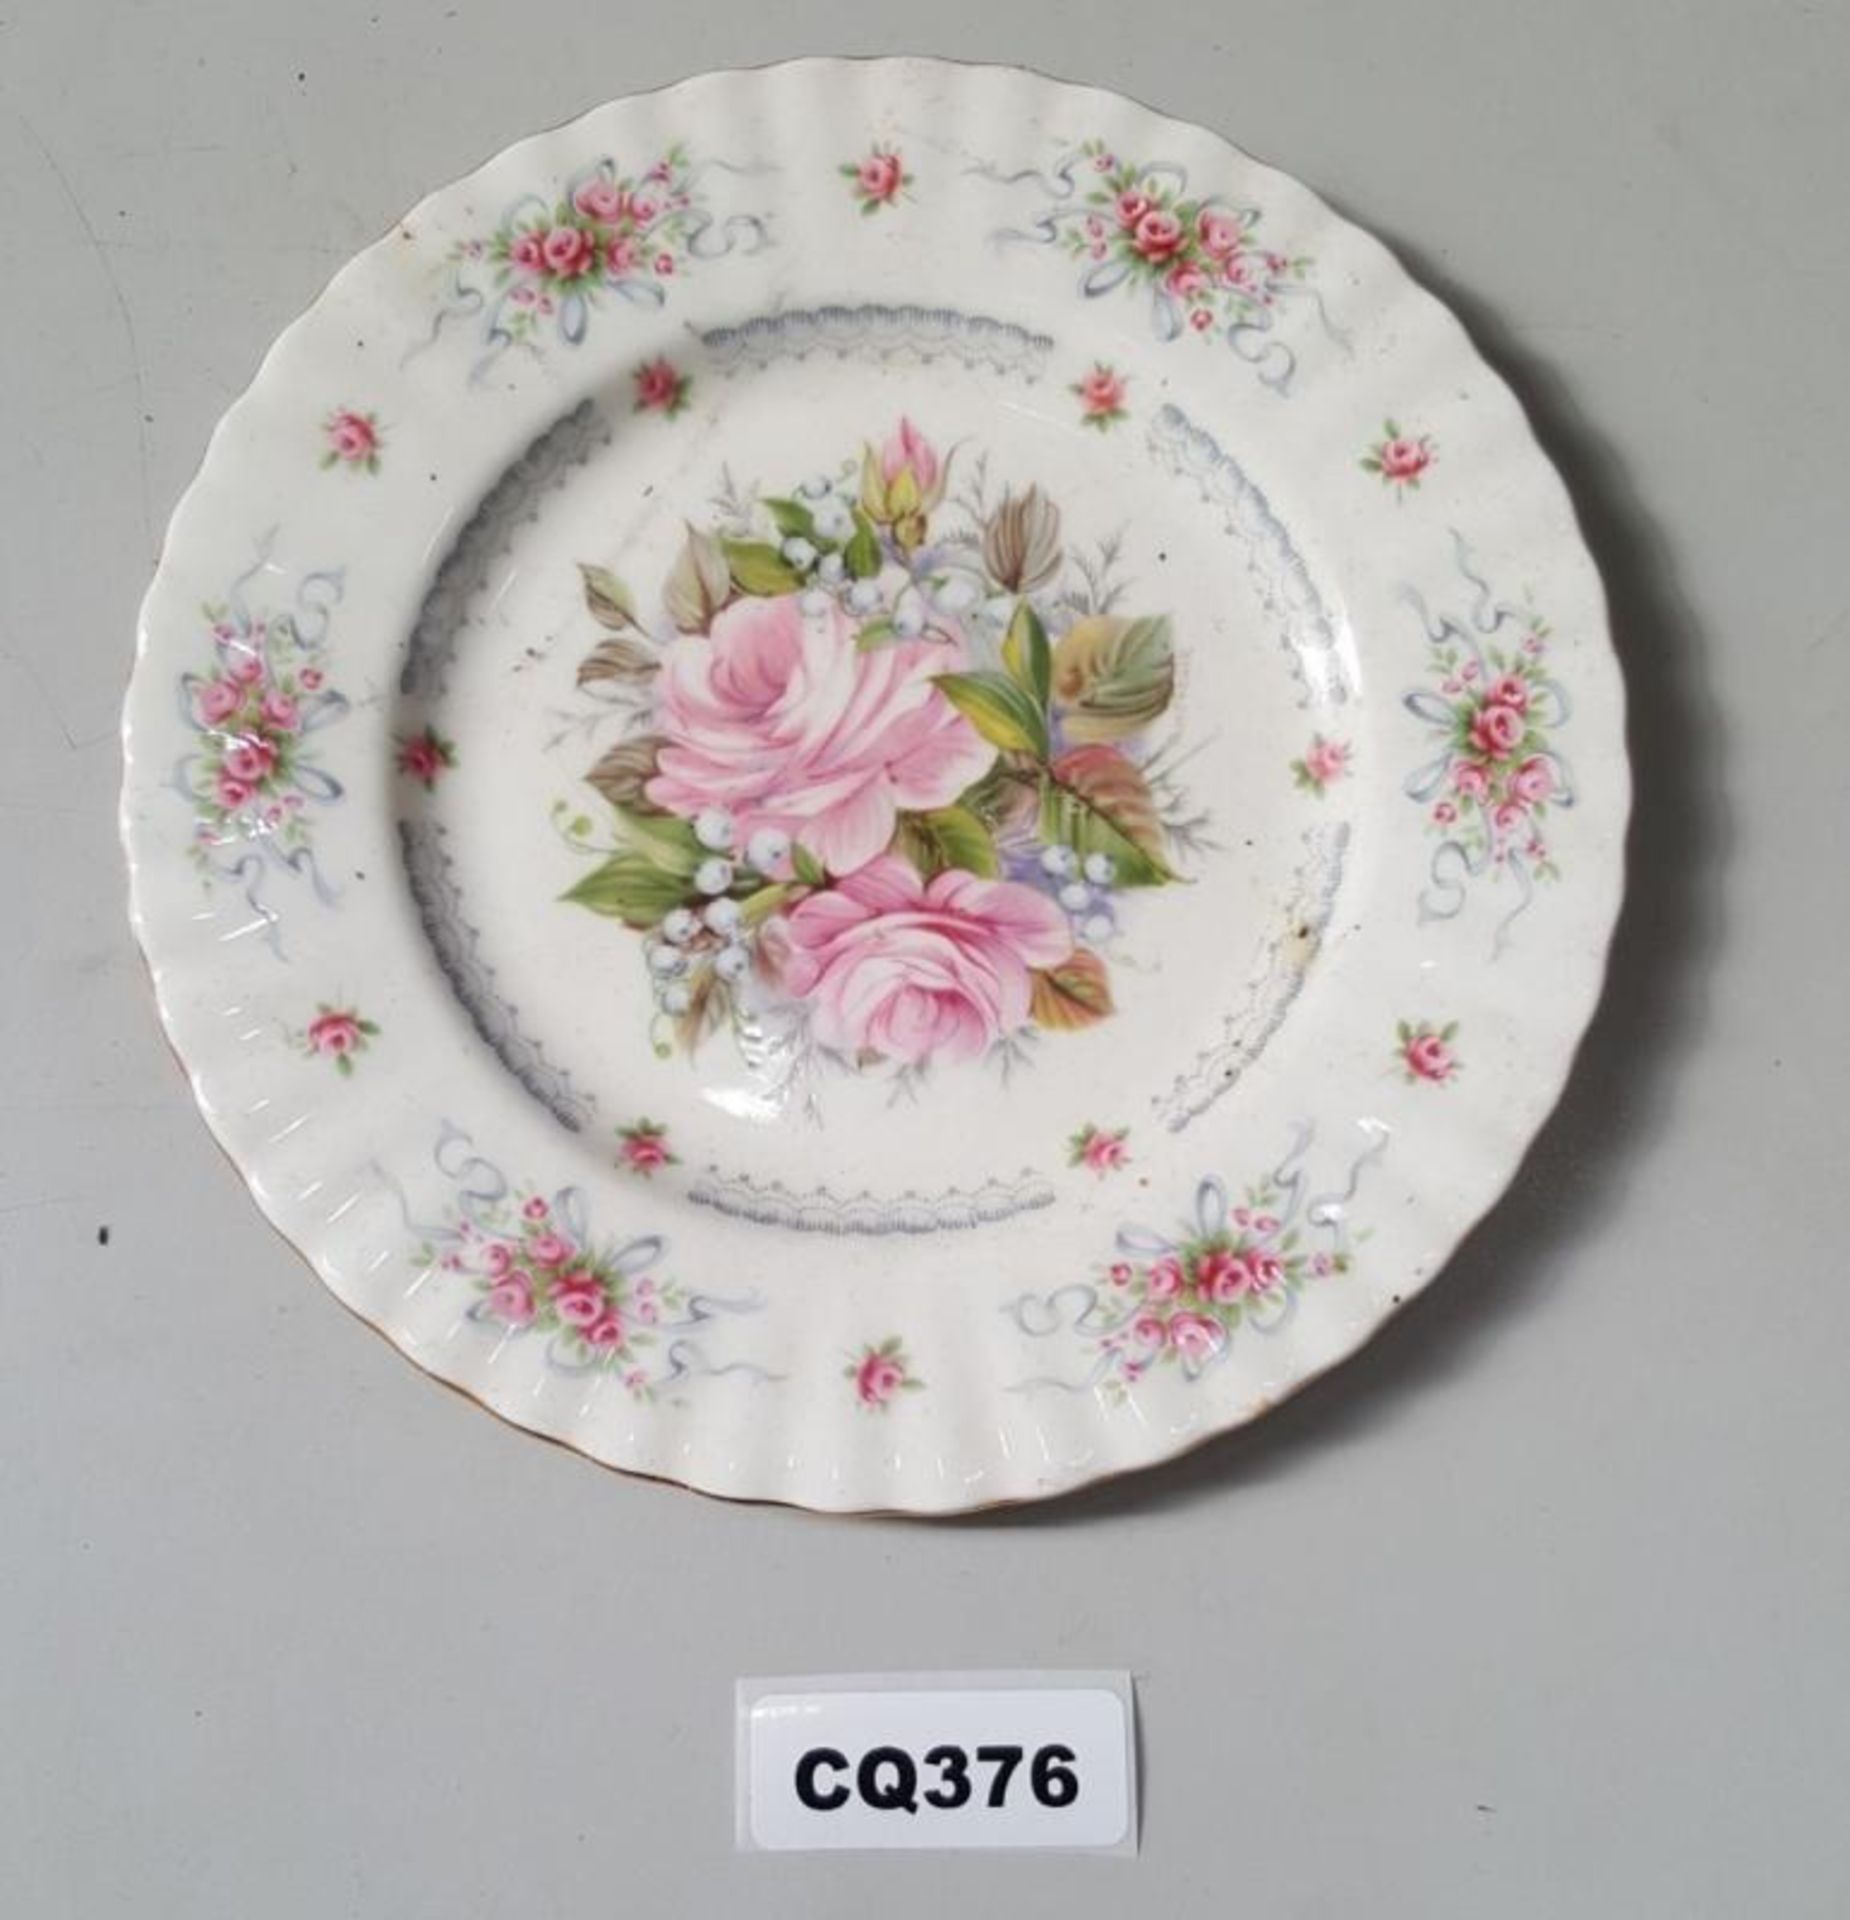 1 x ROYAL ALBERT HAPPY BIRTHDAY FIRST EDITION PLATE - PINK ROSE DESIGN - Ref CQ376 E - Dimensions:D